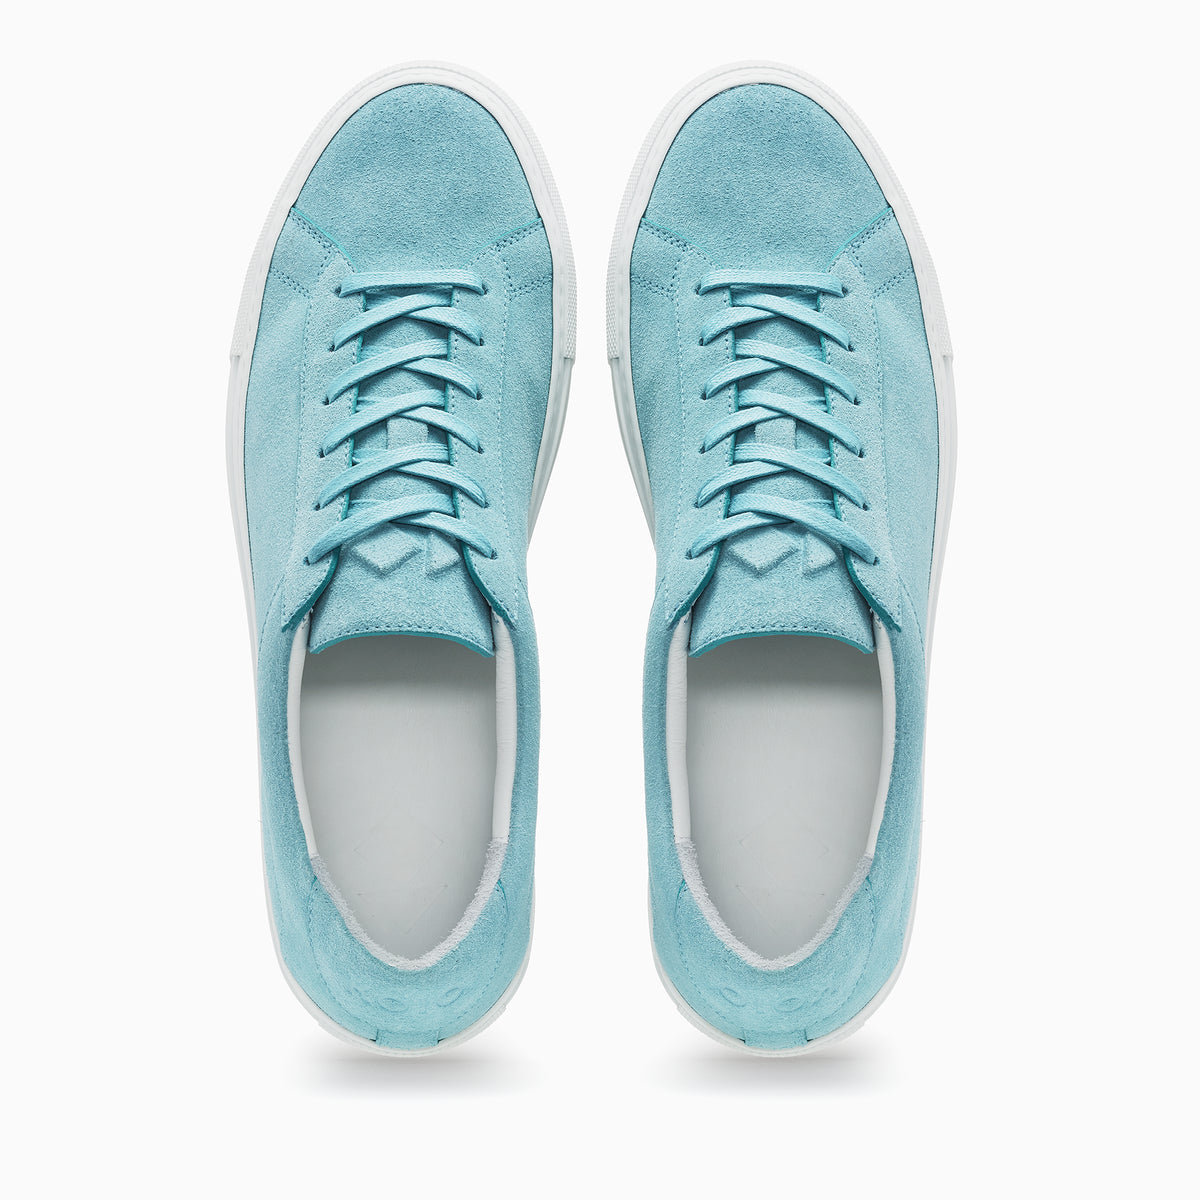 Light blue suede Low Top Sneaker white sole  Womens Koio basic